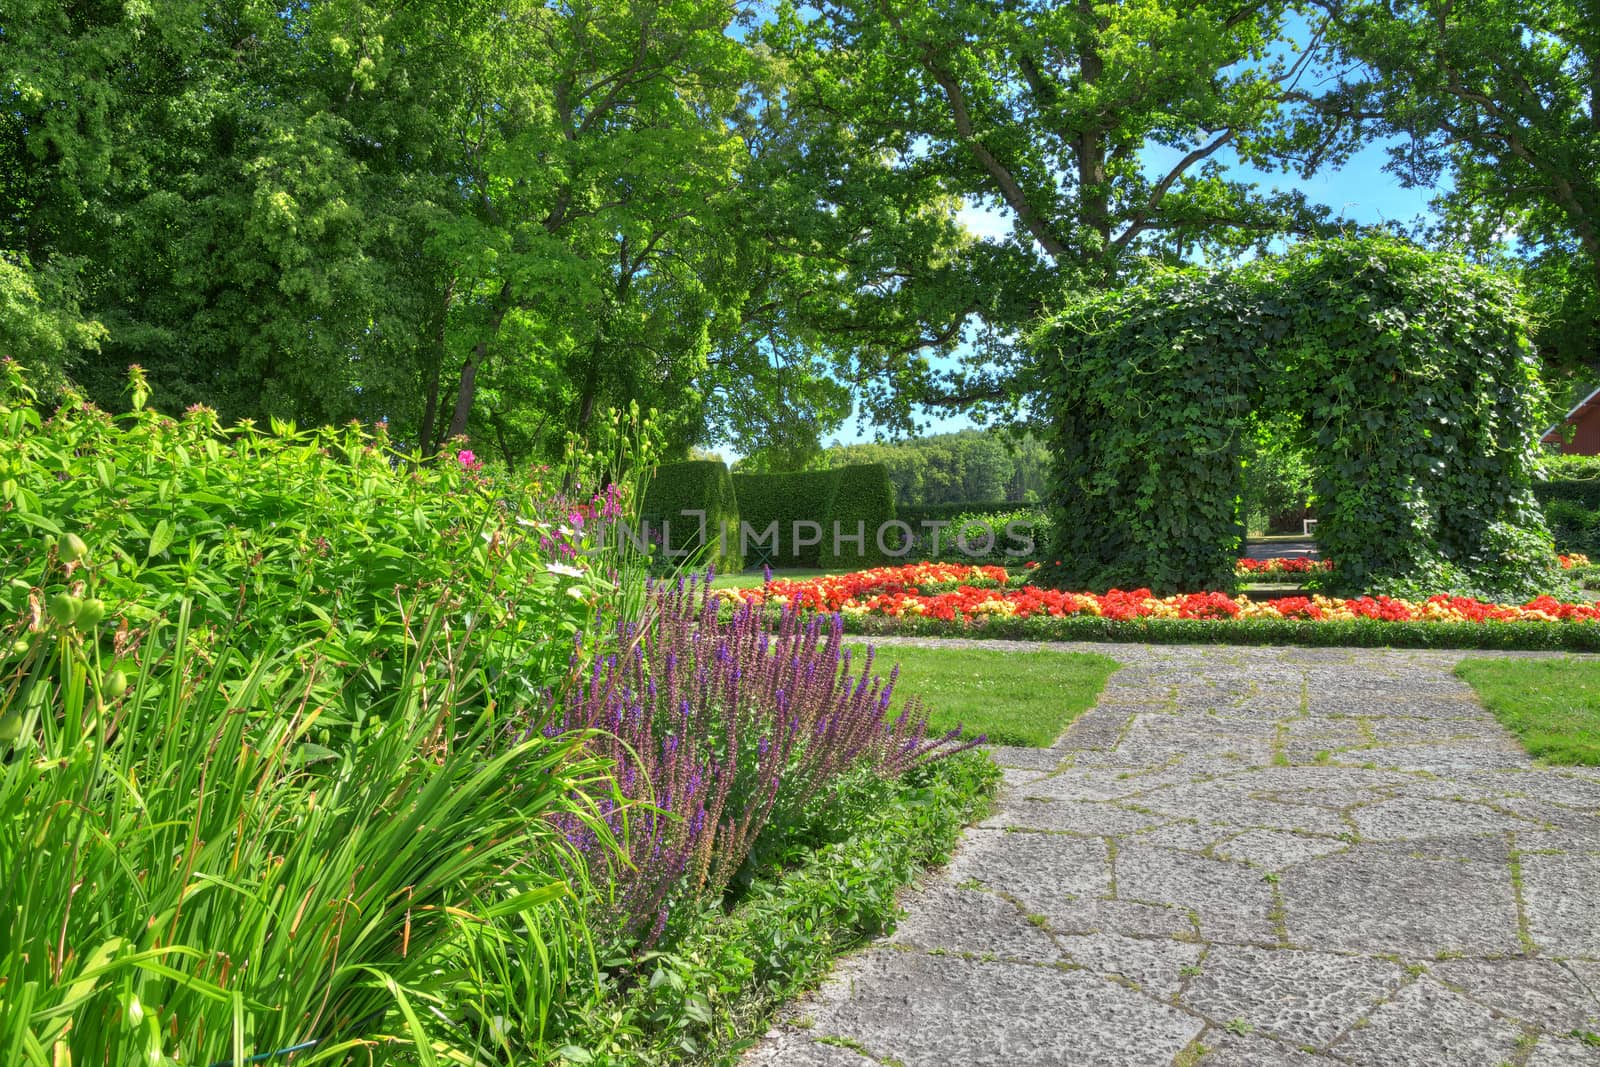 Ornamental garden with stone paths in summer.